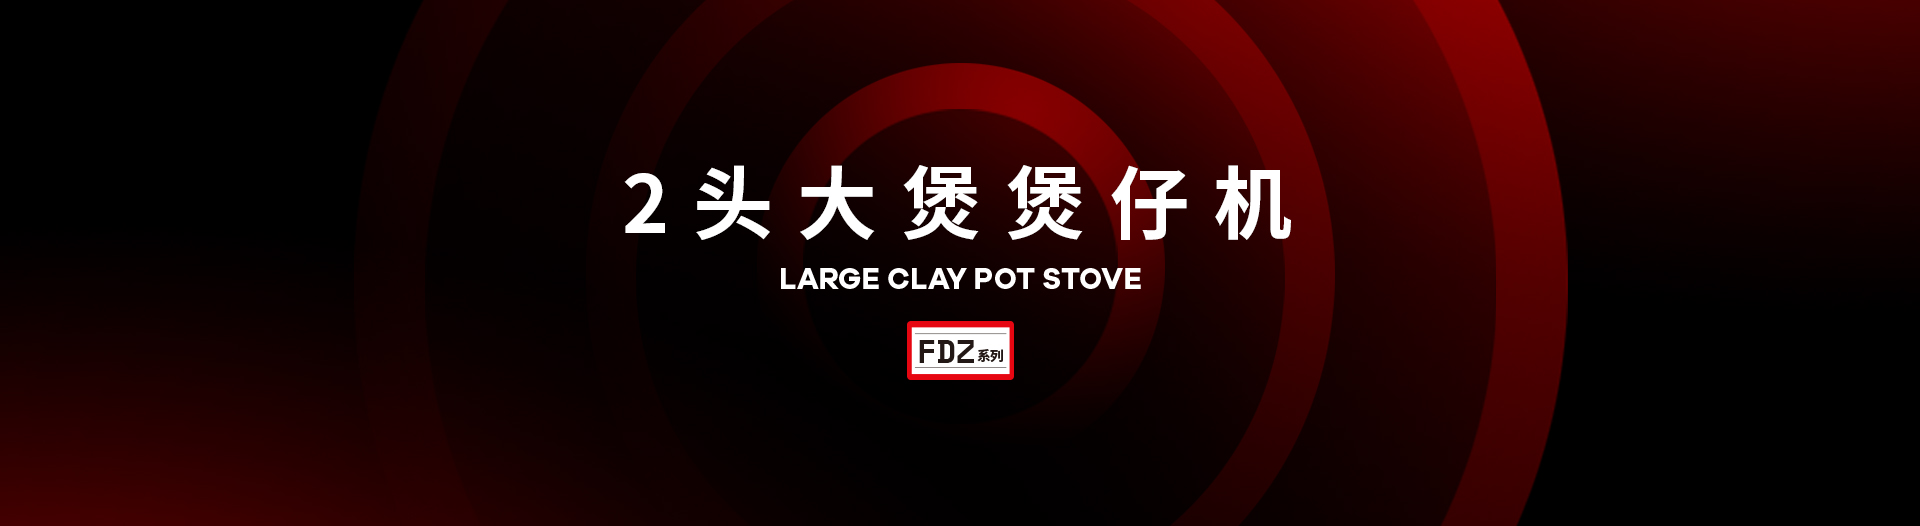 sinswey_engineering_product_large_clay_pot_stove_banner.jpg